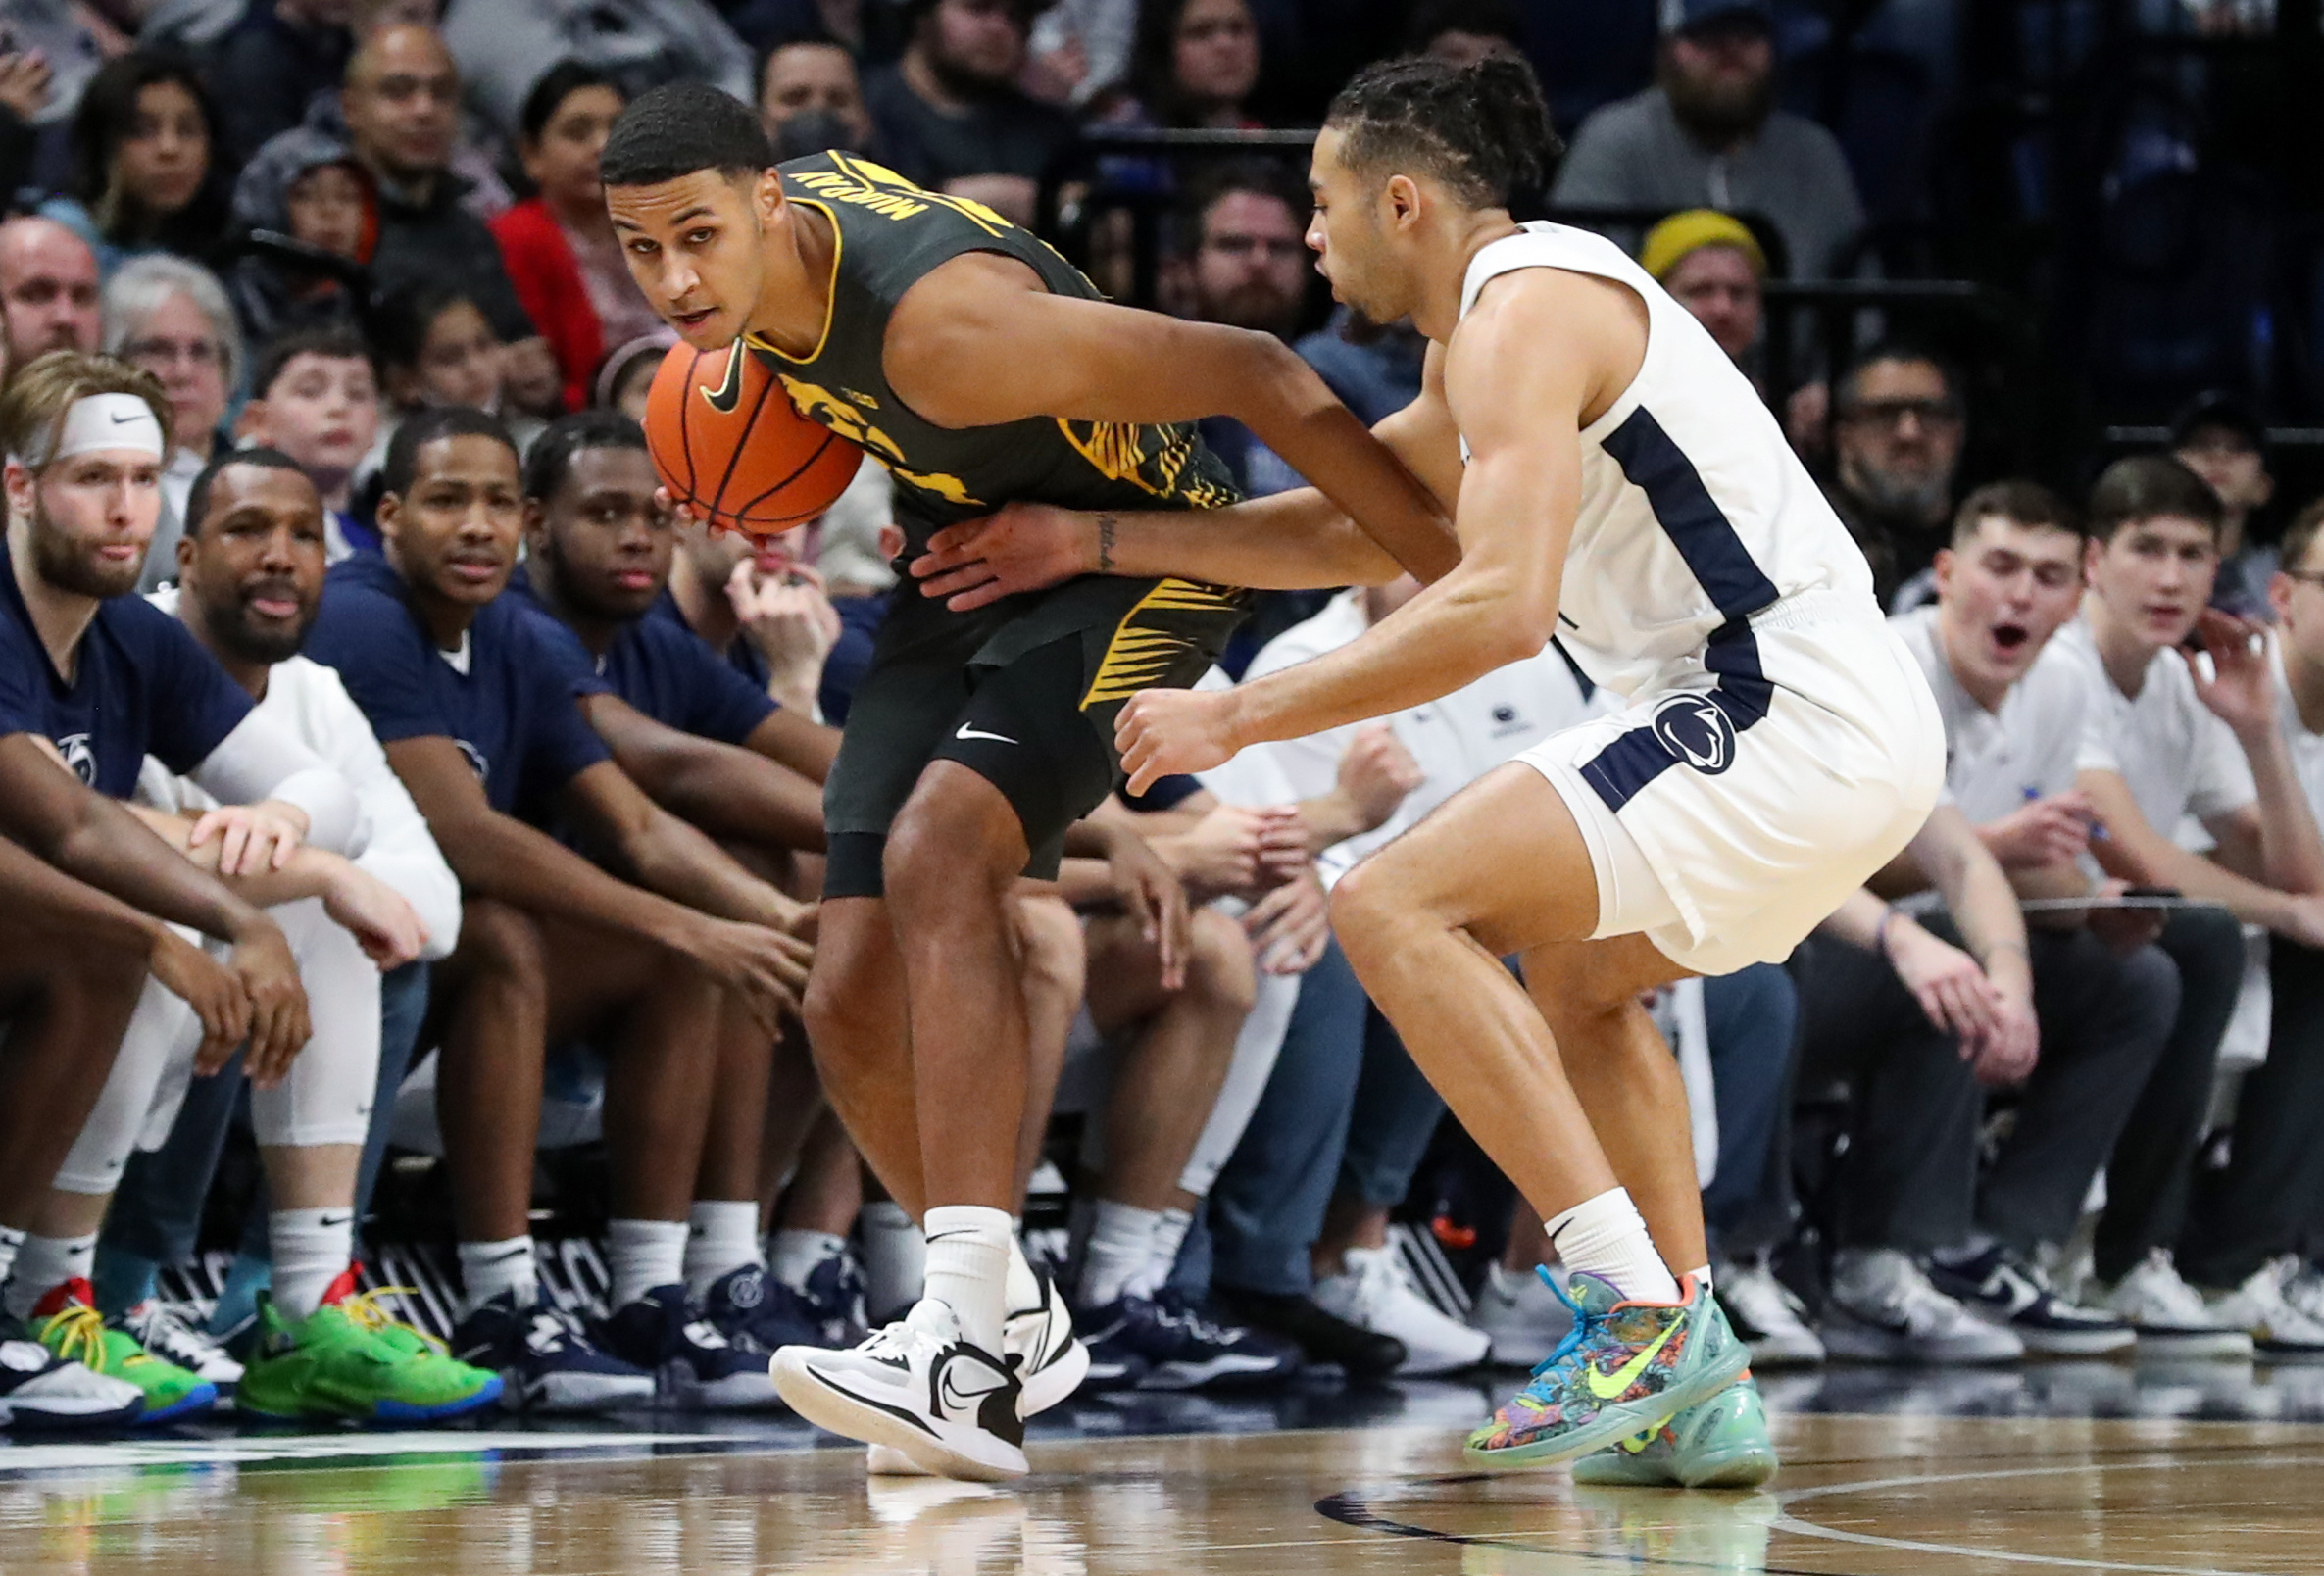 Jan 1, 2023; University Park, Pennsylvania, USA; Iowa Hawkeyes forward Kris Murray (24) holds onto the ball as Penn State Nittany Lions guard/forward Seth Lundy (1) defends during the first half at Bryce Jordan Center.